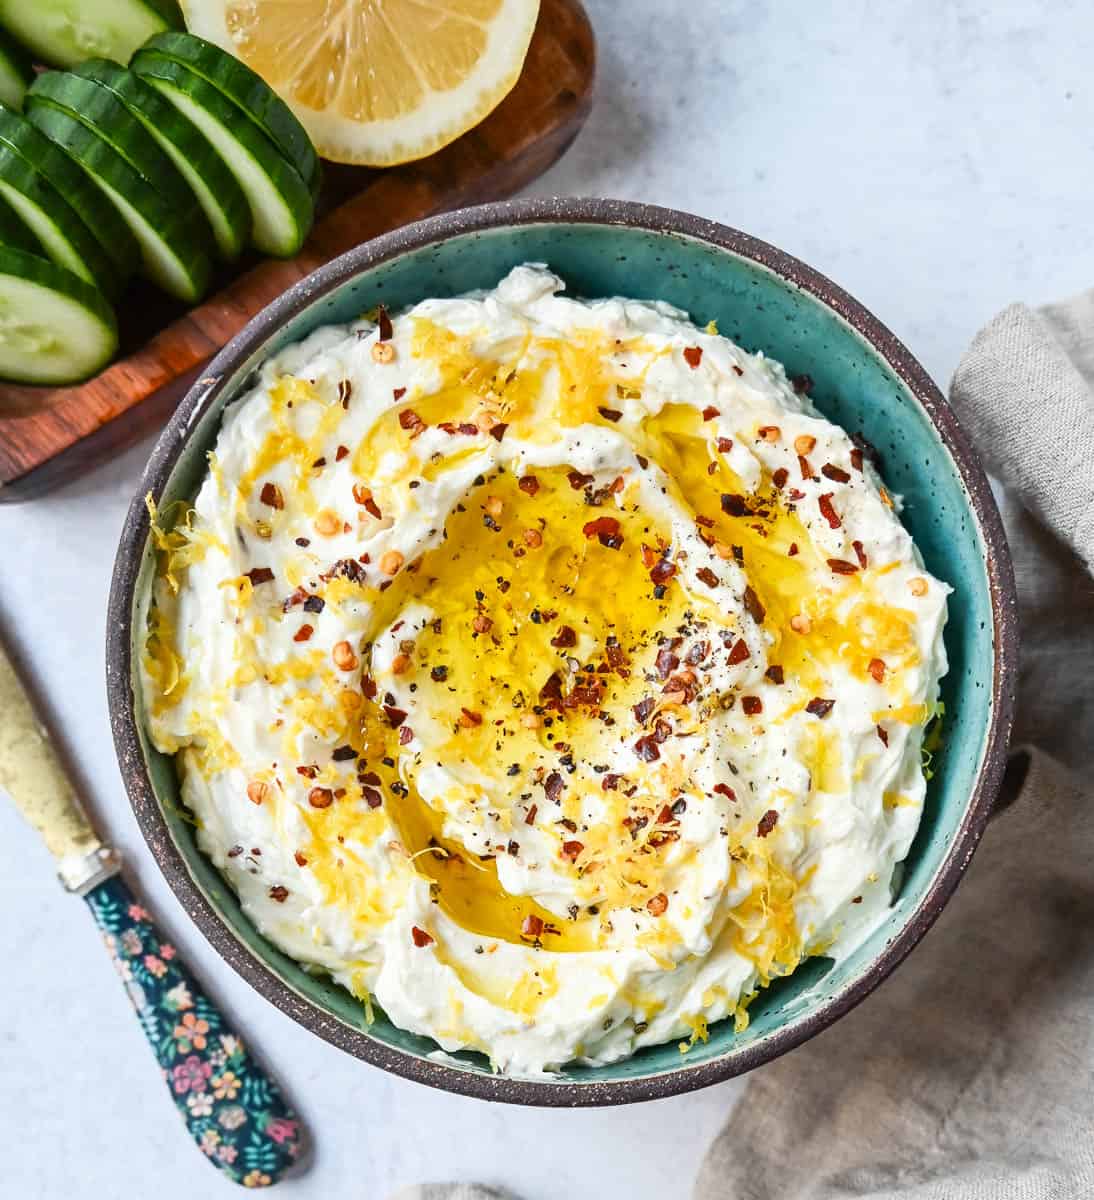 Simple and creamy whipped feta cheese dip is the perfect appetizer! Mediterranean feta cheese is whipped with cream cheese, olive oil, lemon zest, and warm spices. Fresh and tangy, it pairs perfectly with pita bread and veggies!